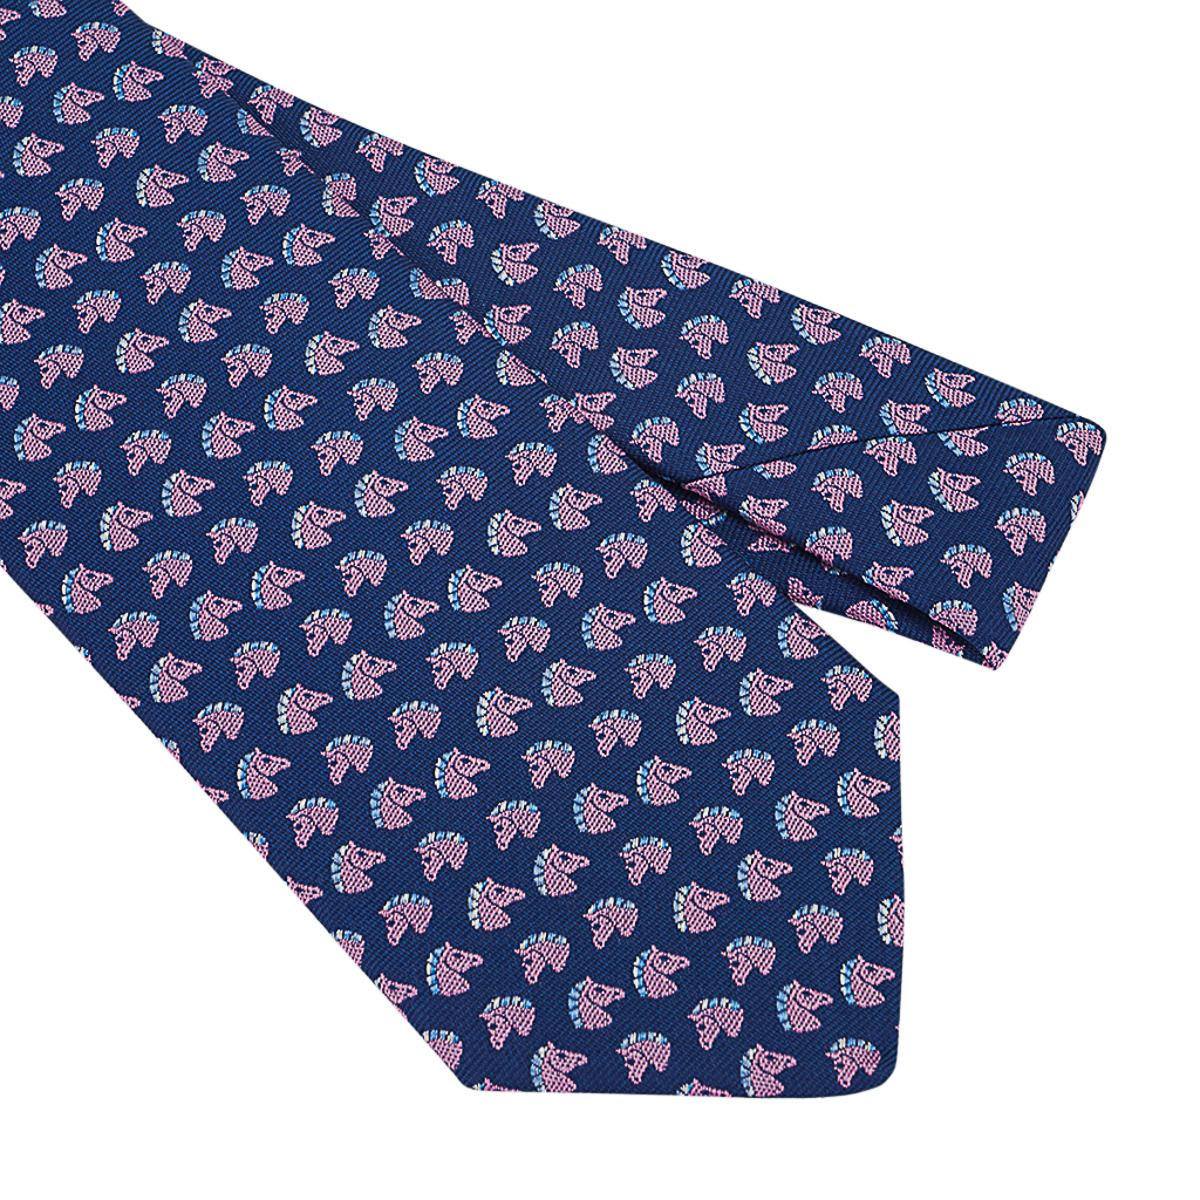 Mightychic offers an Hermes 7 Cheval Rebelle Tie featured in Marine Rose and Bleu colorway.
Hand-sewn heavy silk twill.
Logo lining.
Made in France
NEW or NEVER WORN.
final sale

TIE MEASURES:
WIDTH 3.15